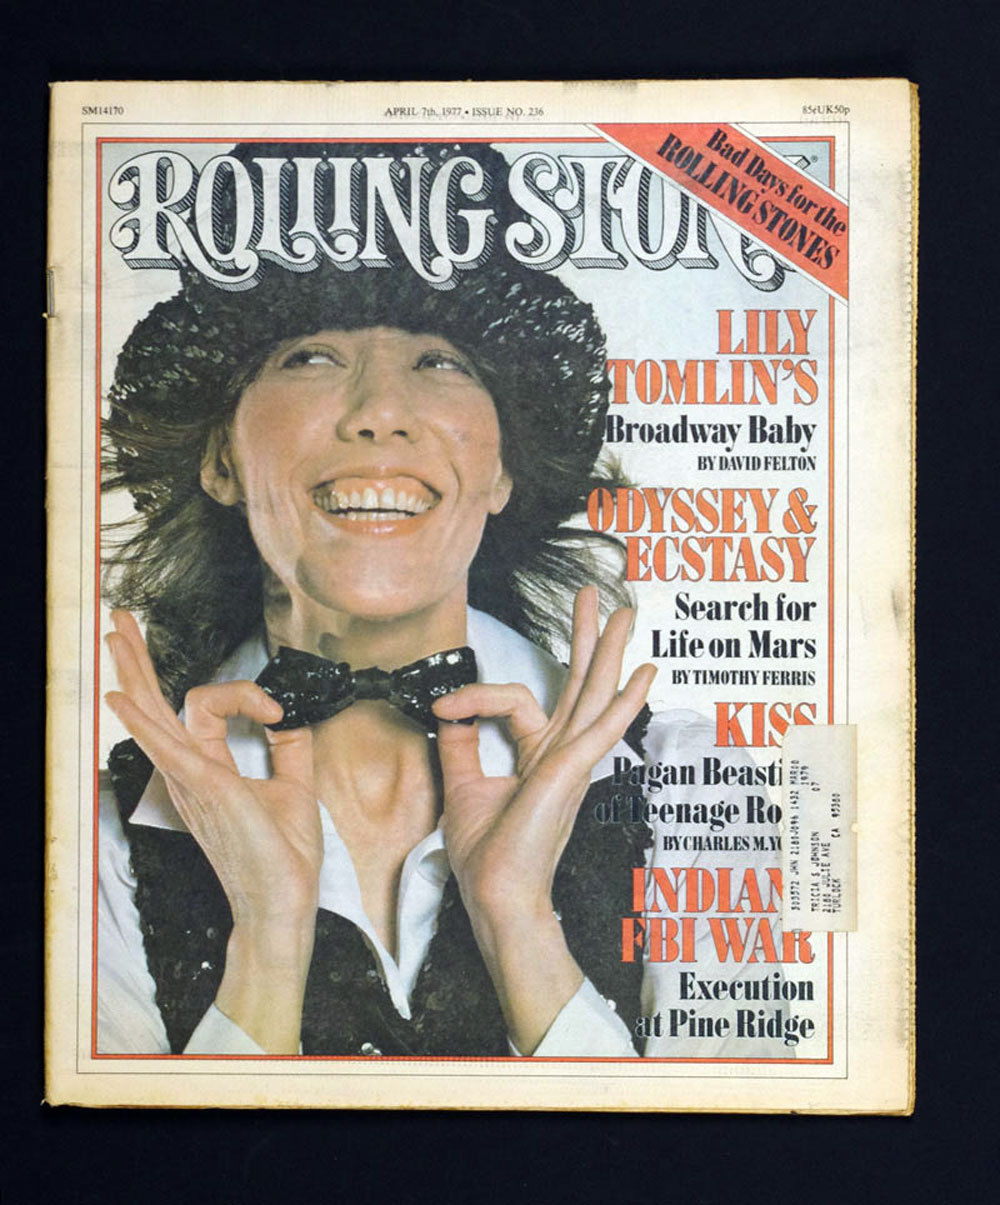 Rolling Stone Magazine Back Issue 1977 Apr 7 No. 236 Lily Tomlin 